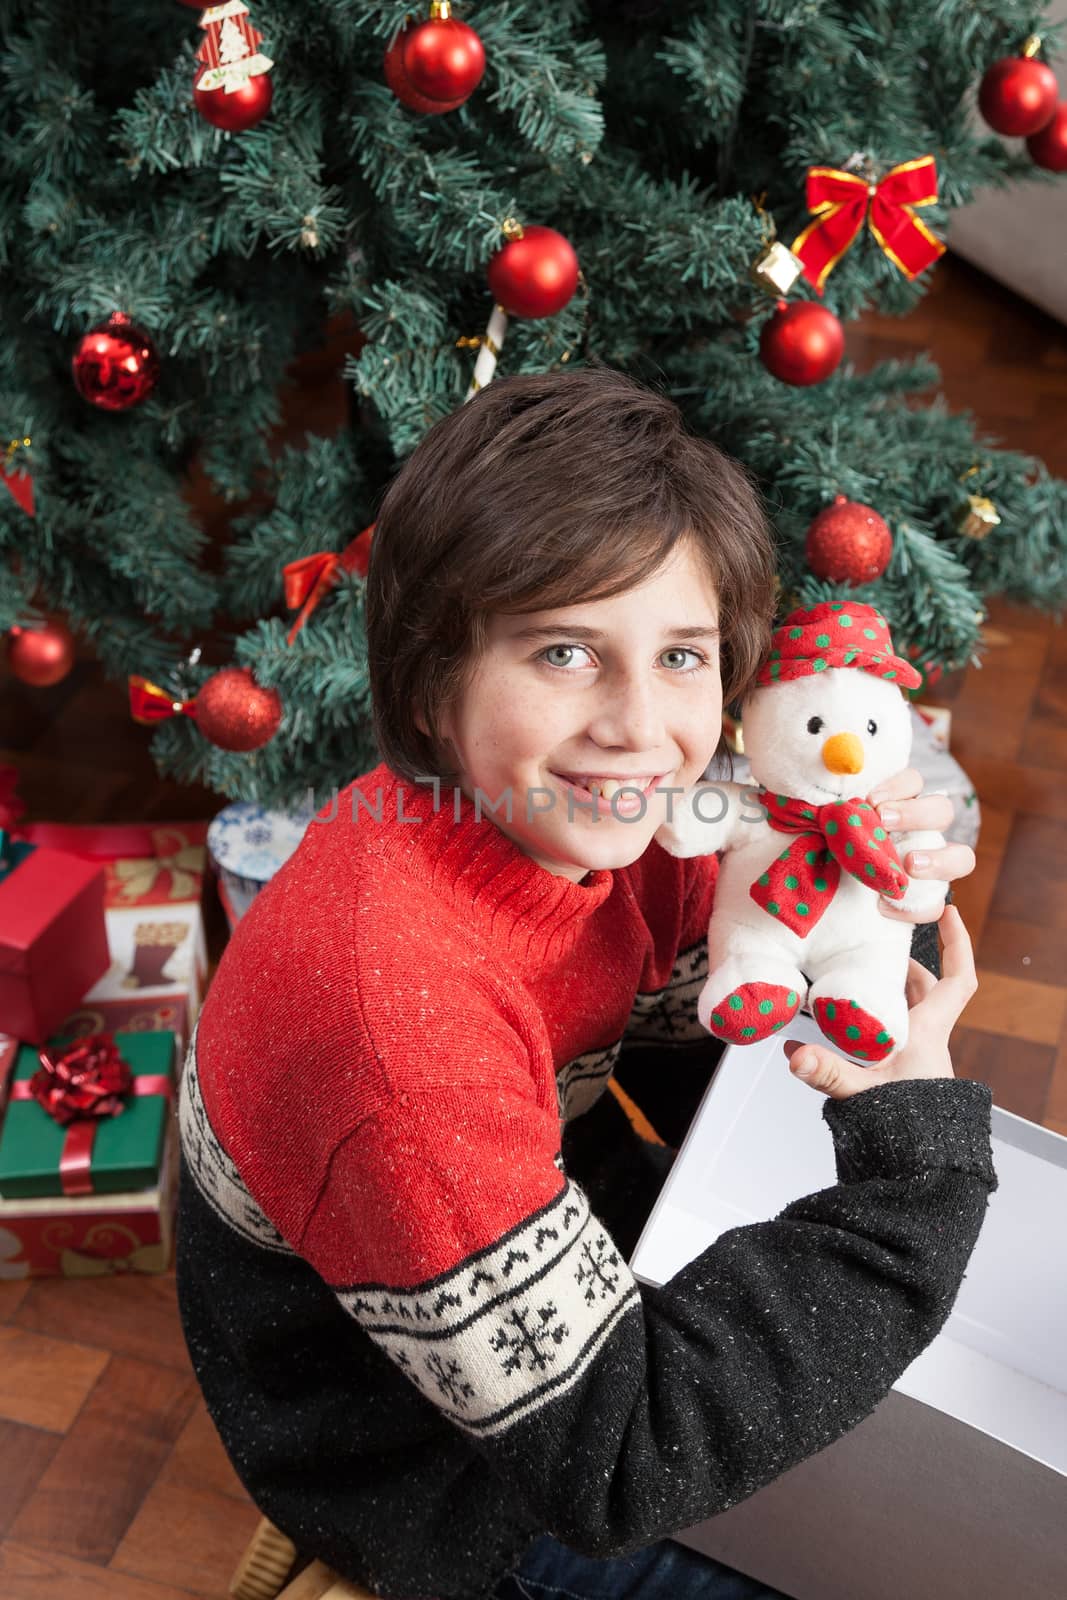 10-12, beside, box, boy, camera, caucasian, celebration, child, childhood, christmas, christmastime, claus, cute, event, eyes, floor, gift, giftbox, green, handsome, happiness, holiday, kid, look, looking, merry, model, new, occasion, old, people, person, present, property, releases, santa, sitting, smile, smiling, son, surprise, tree, x-mas, xmas, year, years, youngster, toy, teddy,